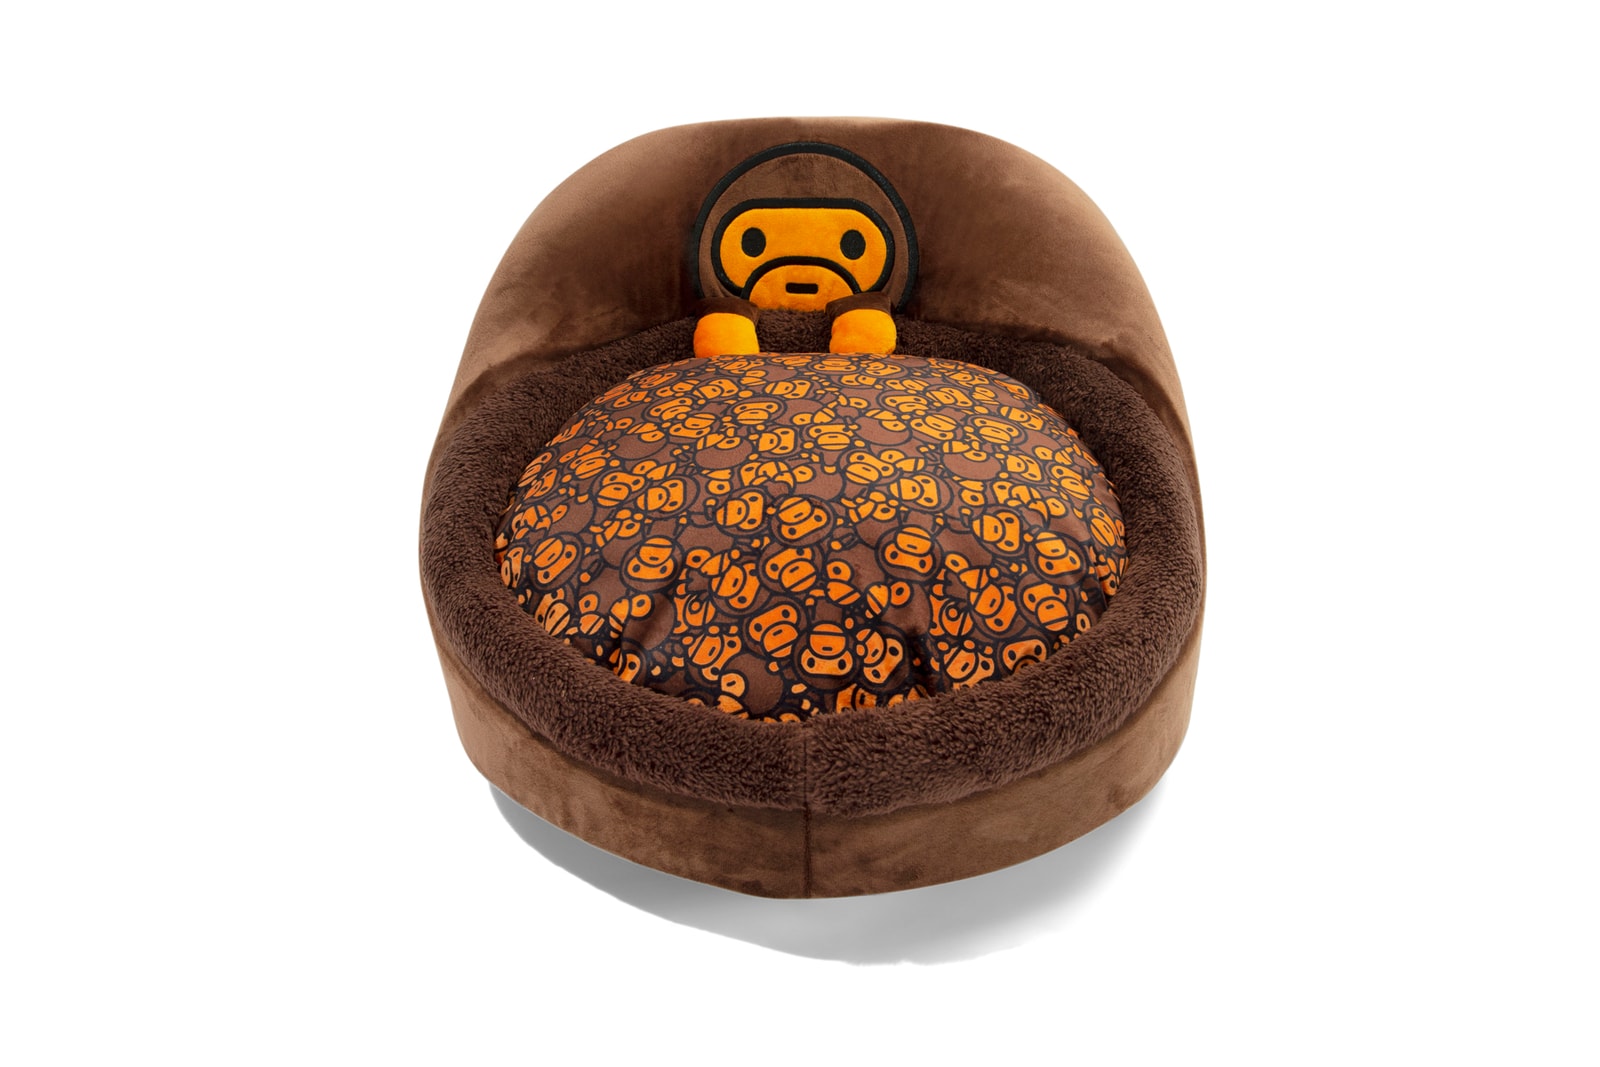 Baby Milo Pet Accessories Fall/Winter 2019 dogs cats camouflage print bape a bain monkey beds bags toys monkey head